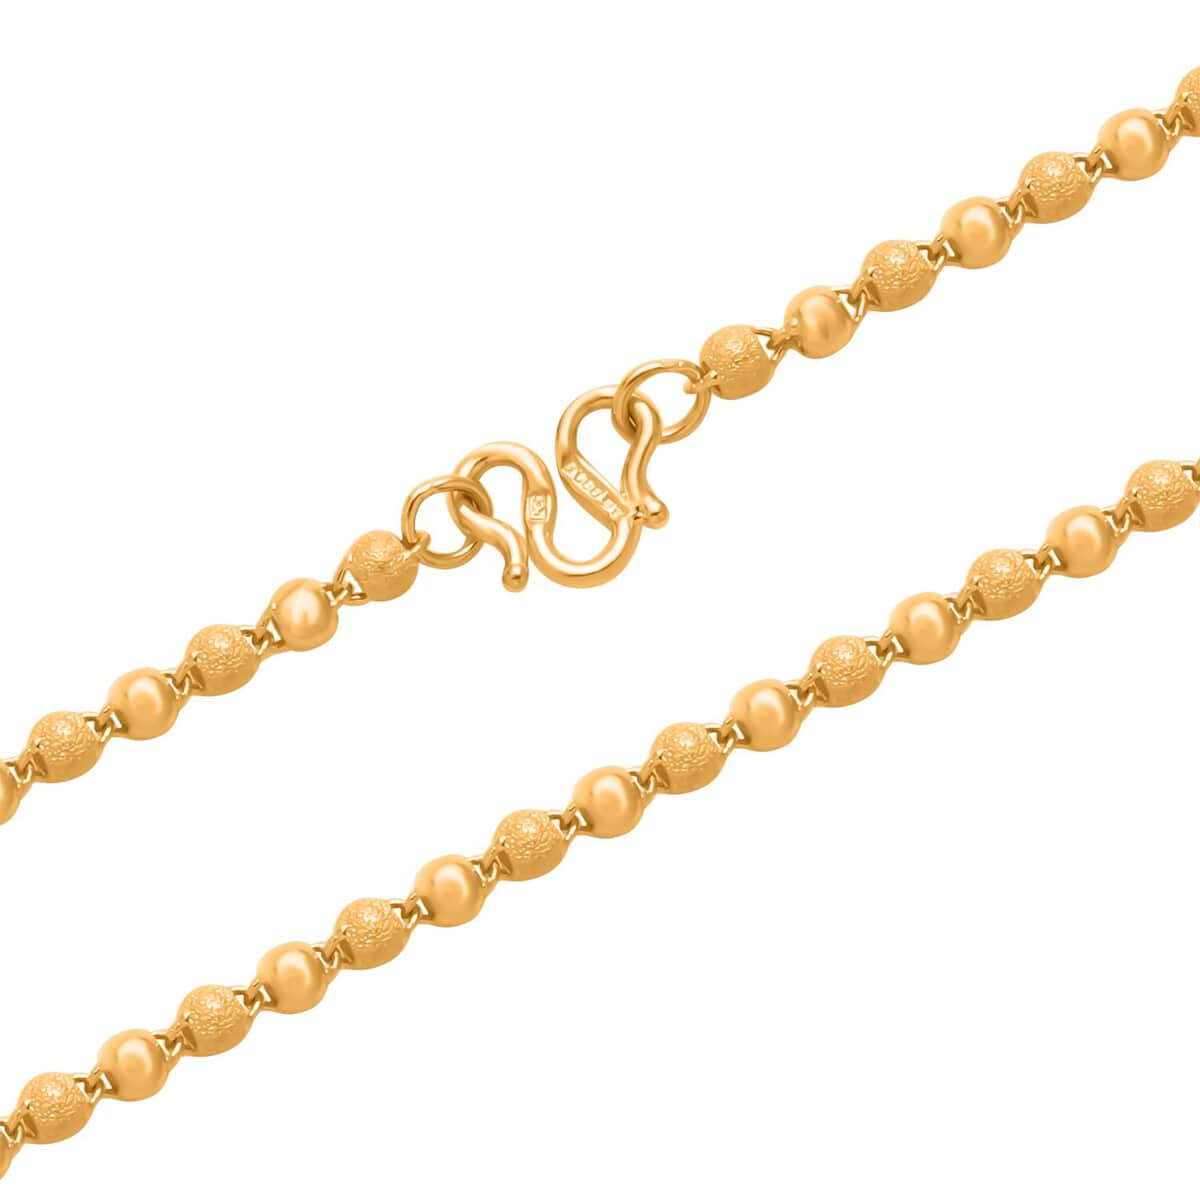 Ankur Treasure Chest 24K Yellow Gold Electroform 4mm Textured Beaded Necklace 18 Inches 14.65 Grams image number 2